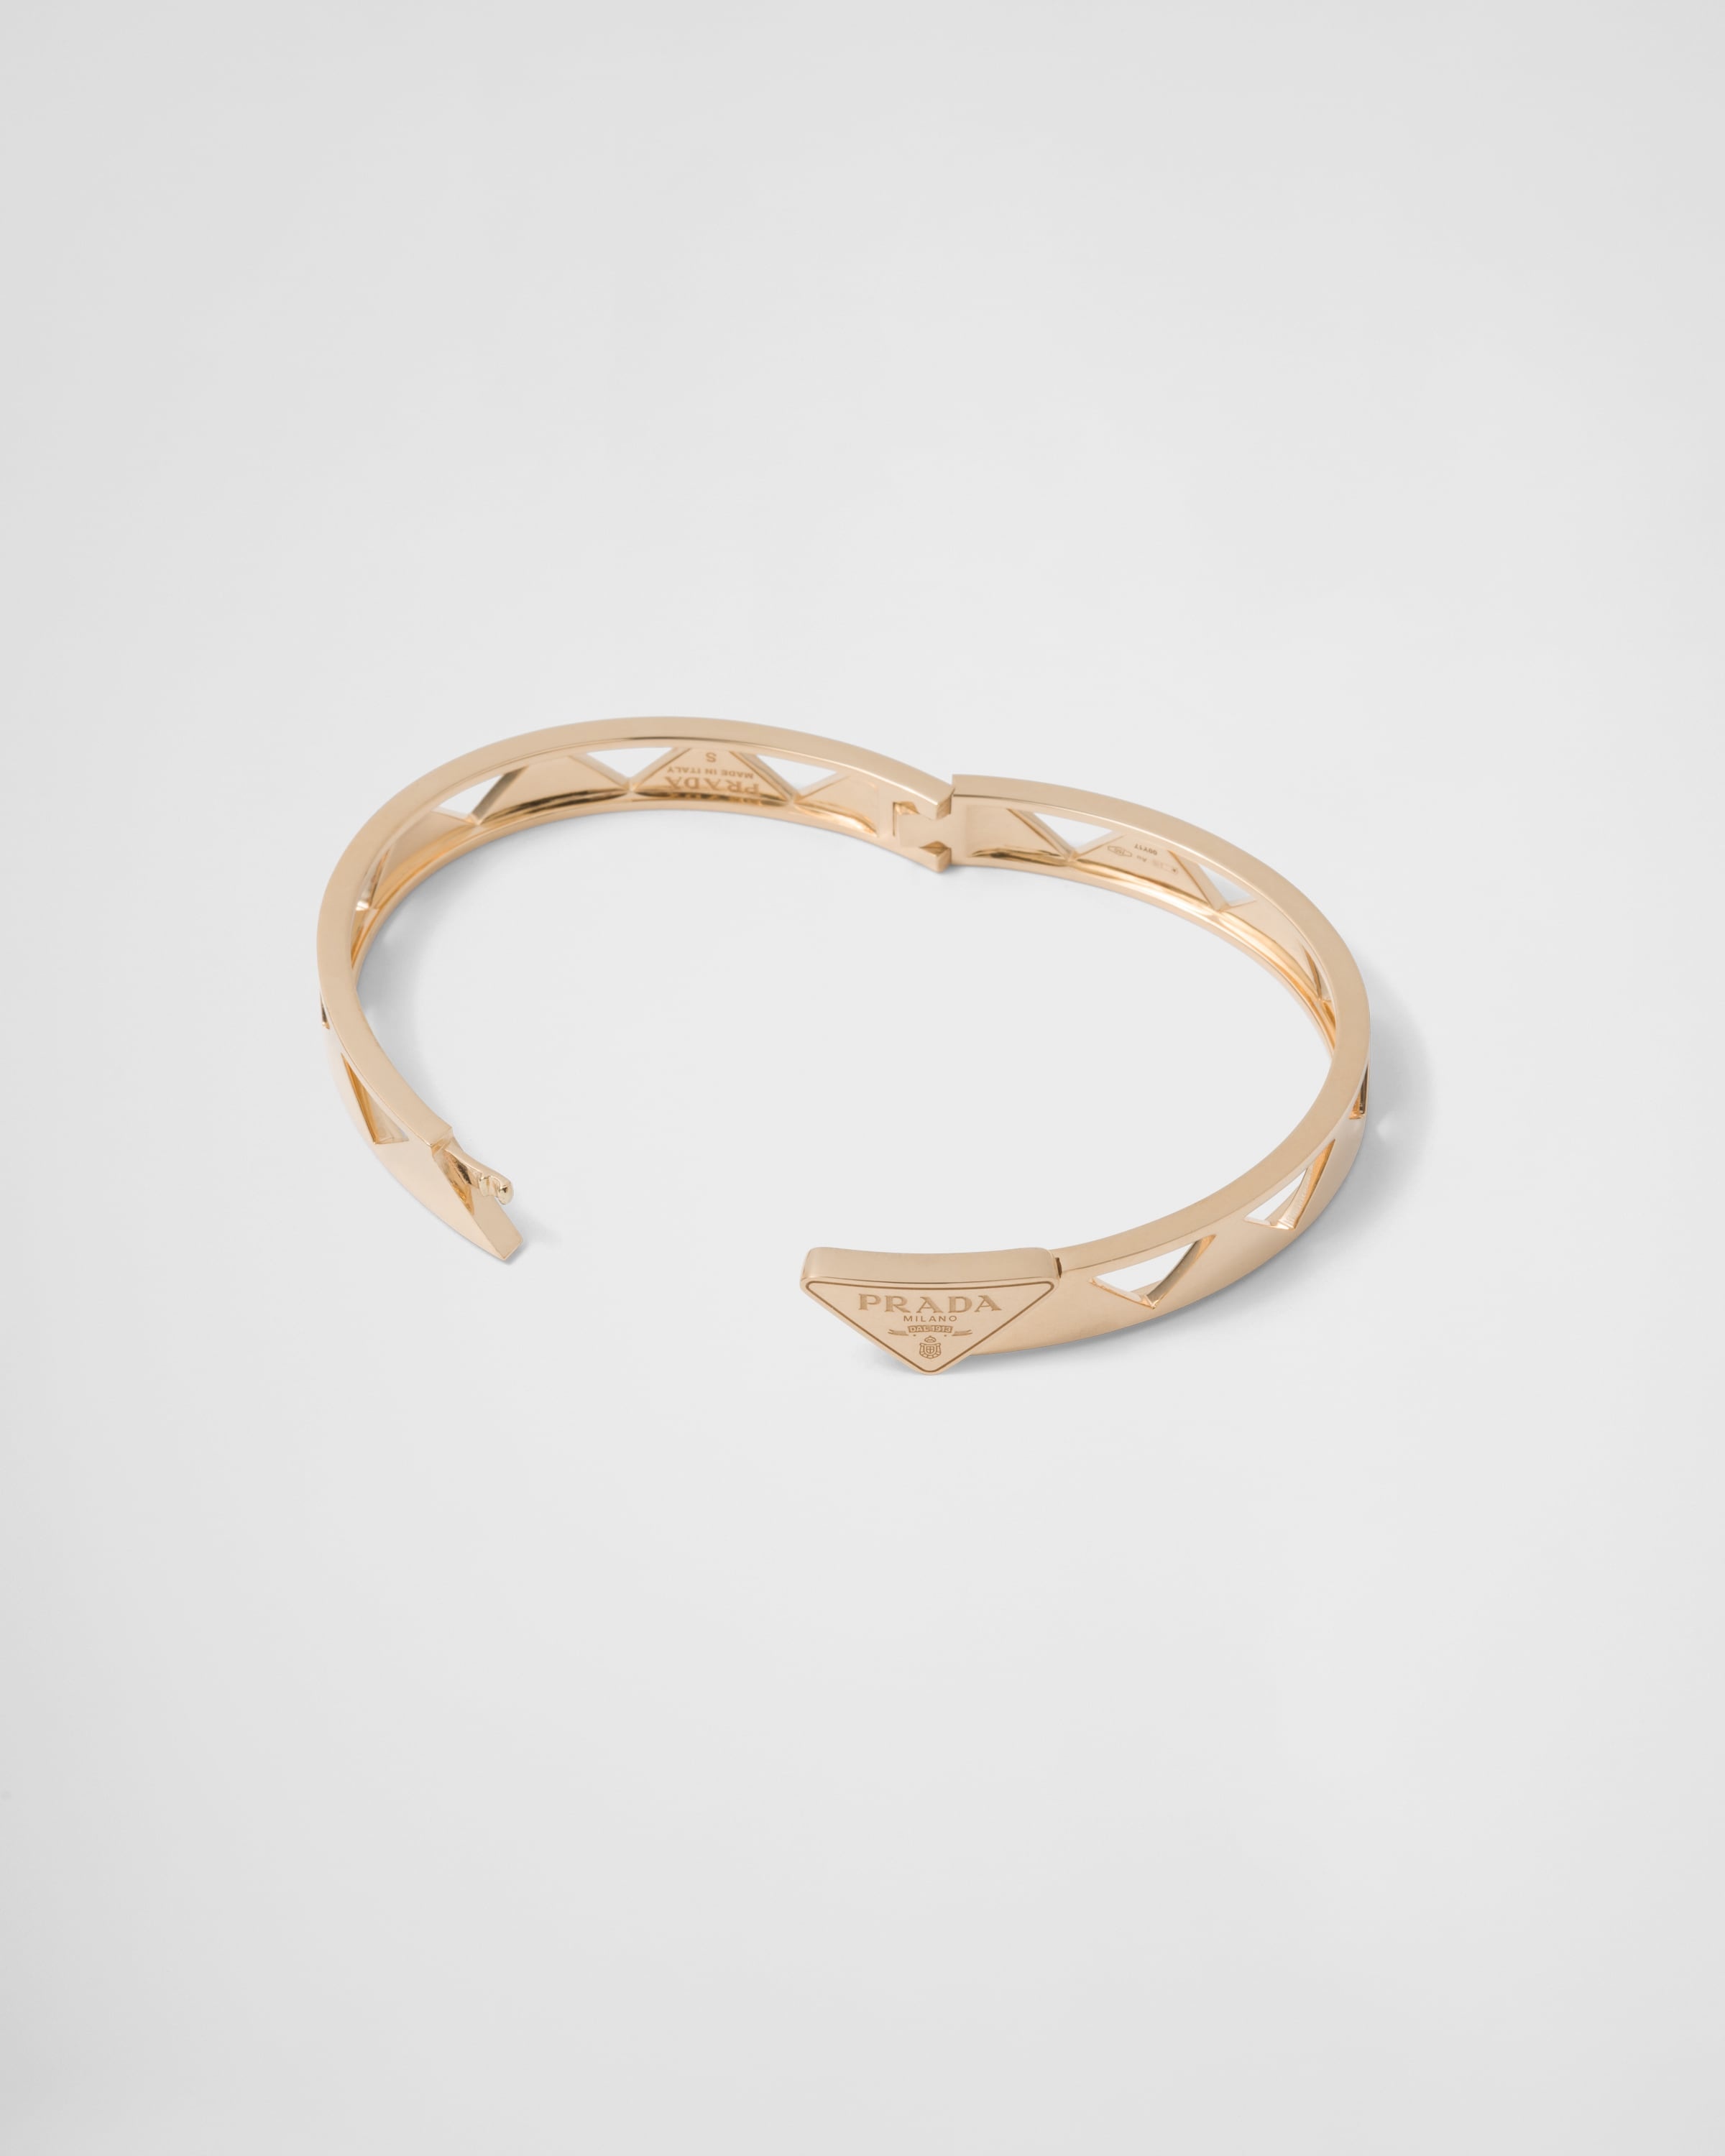 Eternal Gold cut-out bangle bracelet in yellow gold - 3